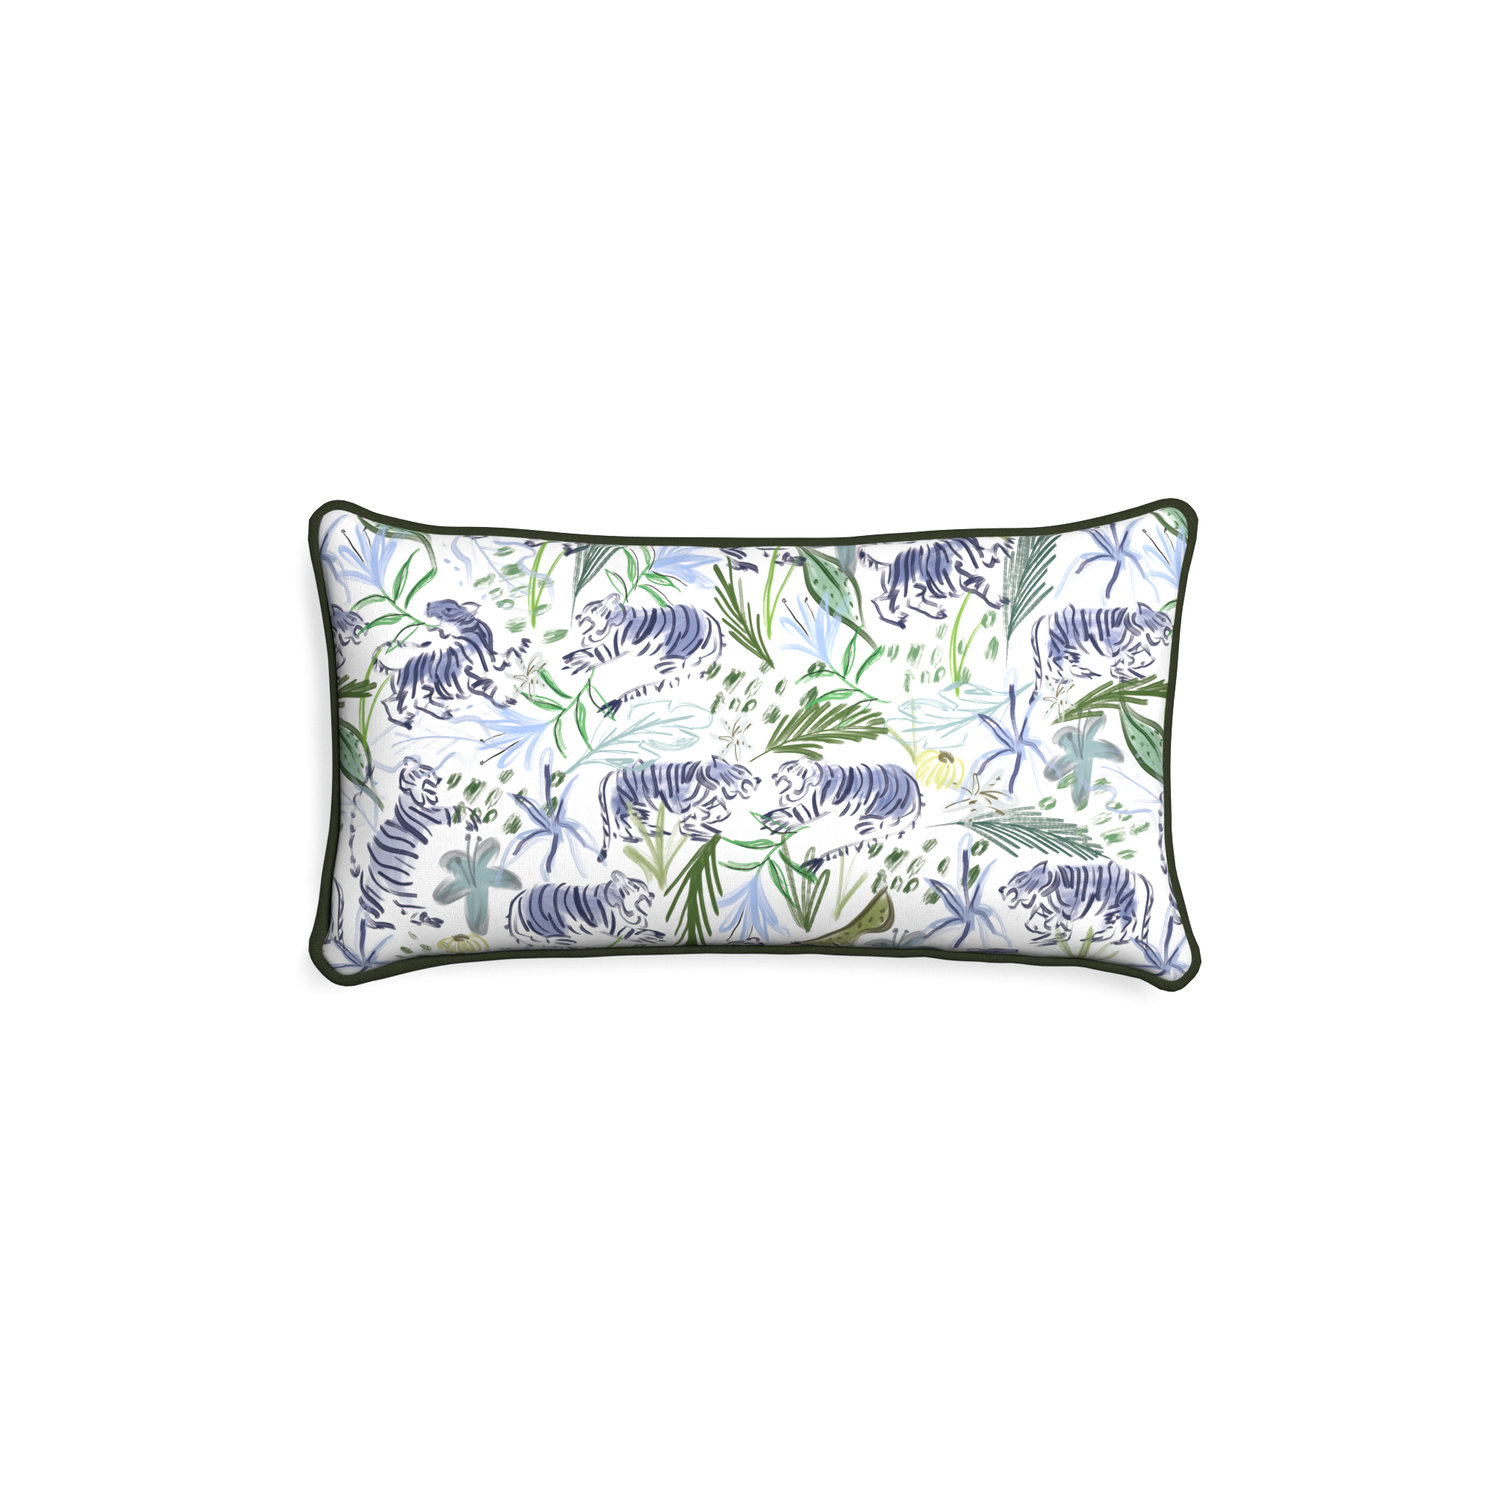 Petite-lumbar frida green custom green tigerpillow with f piping on white background